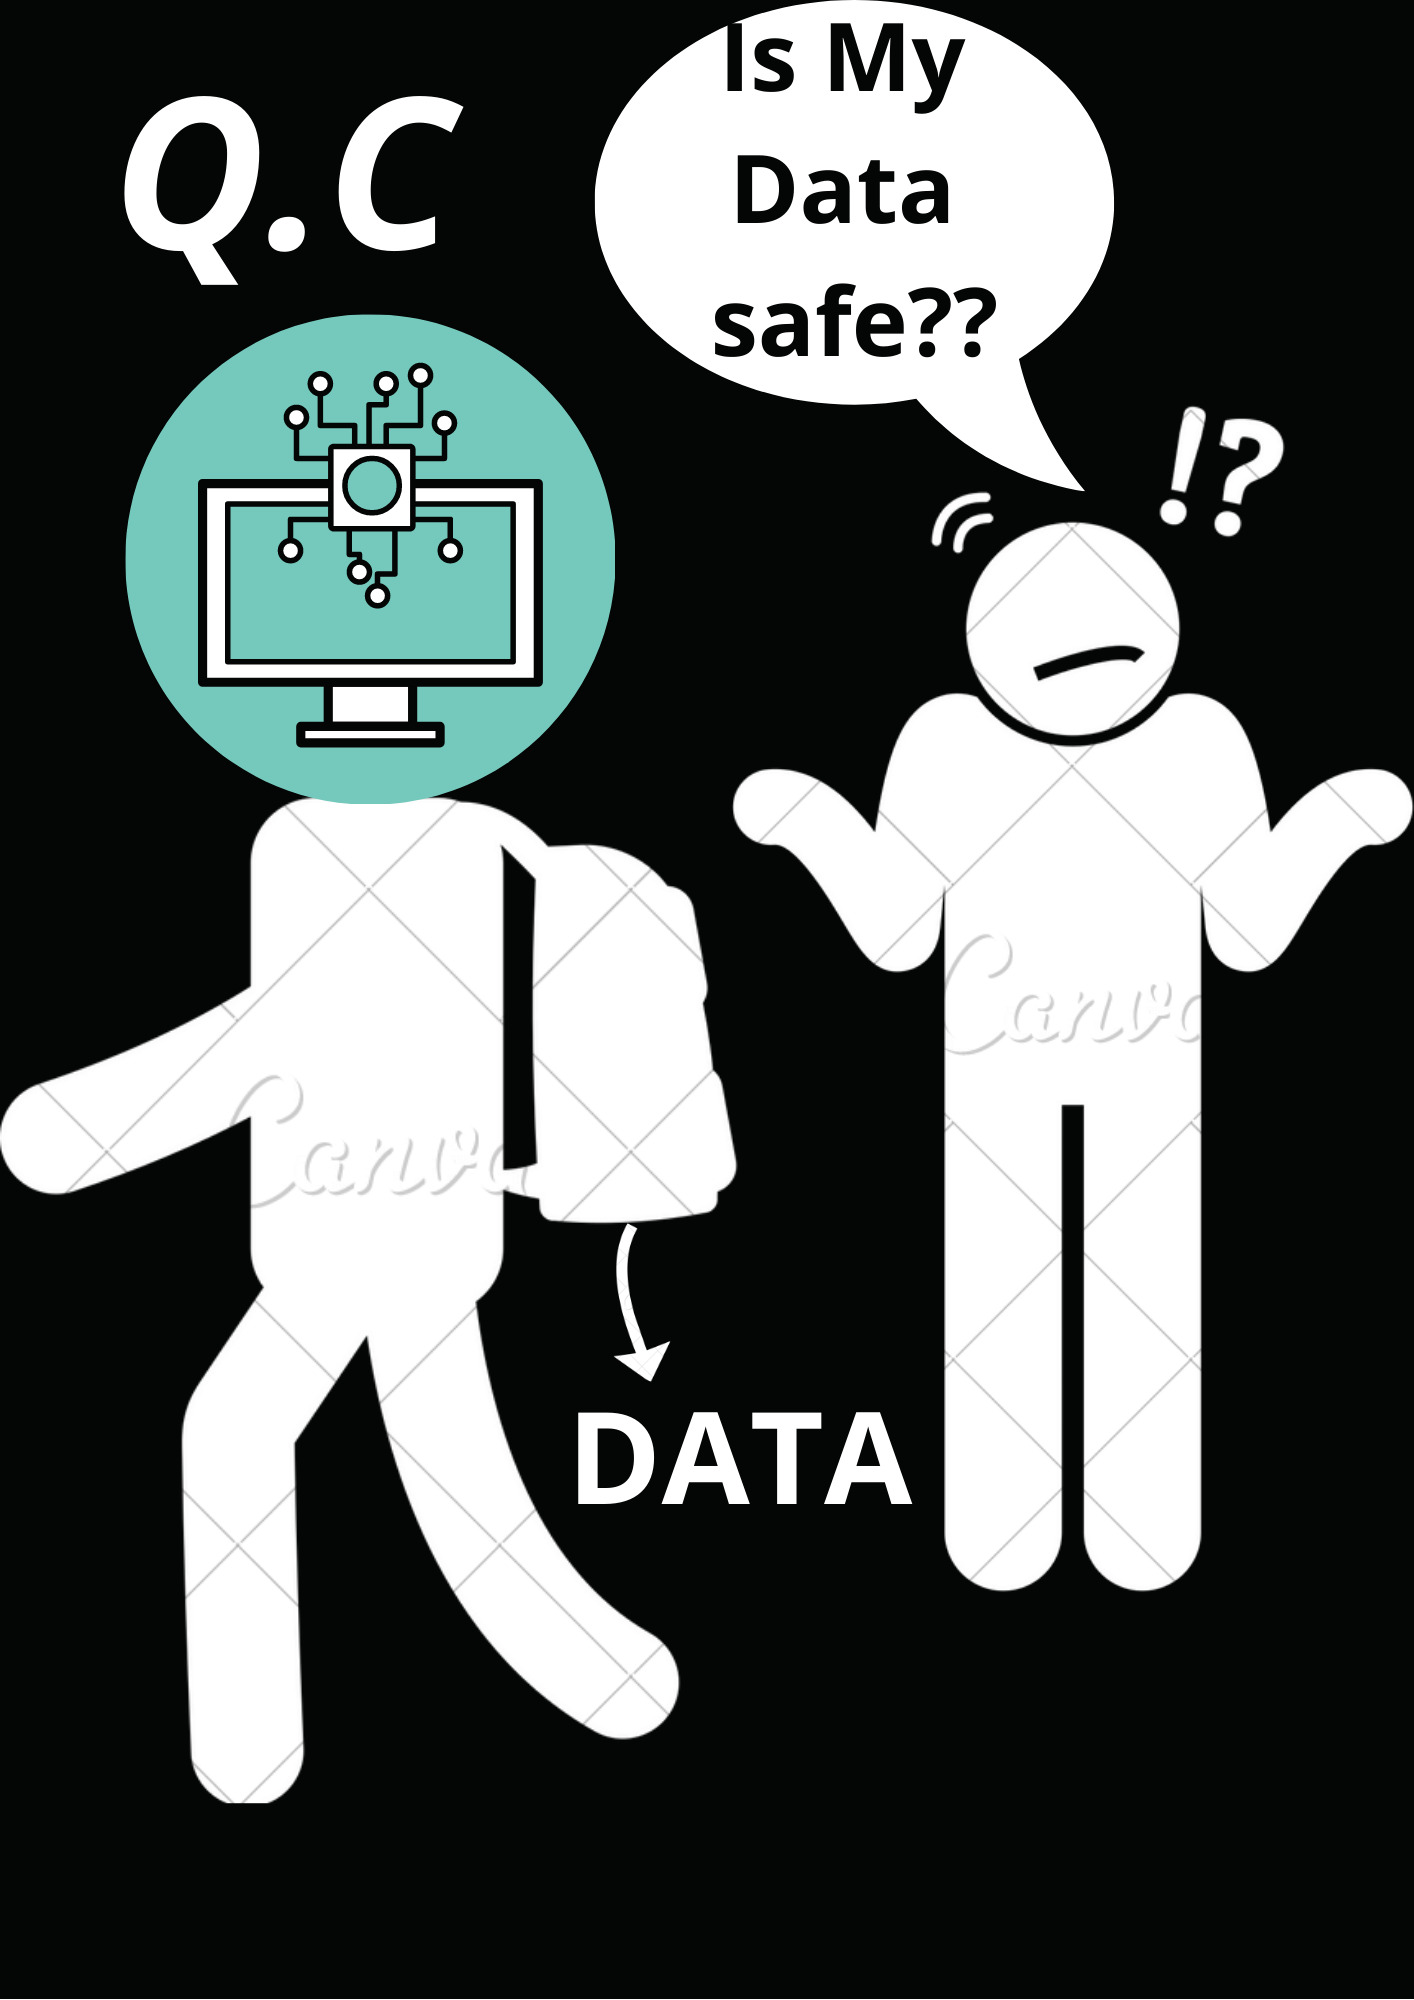 The subject of speculation; Is our data safe?